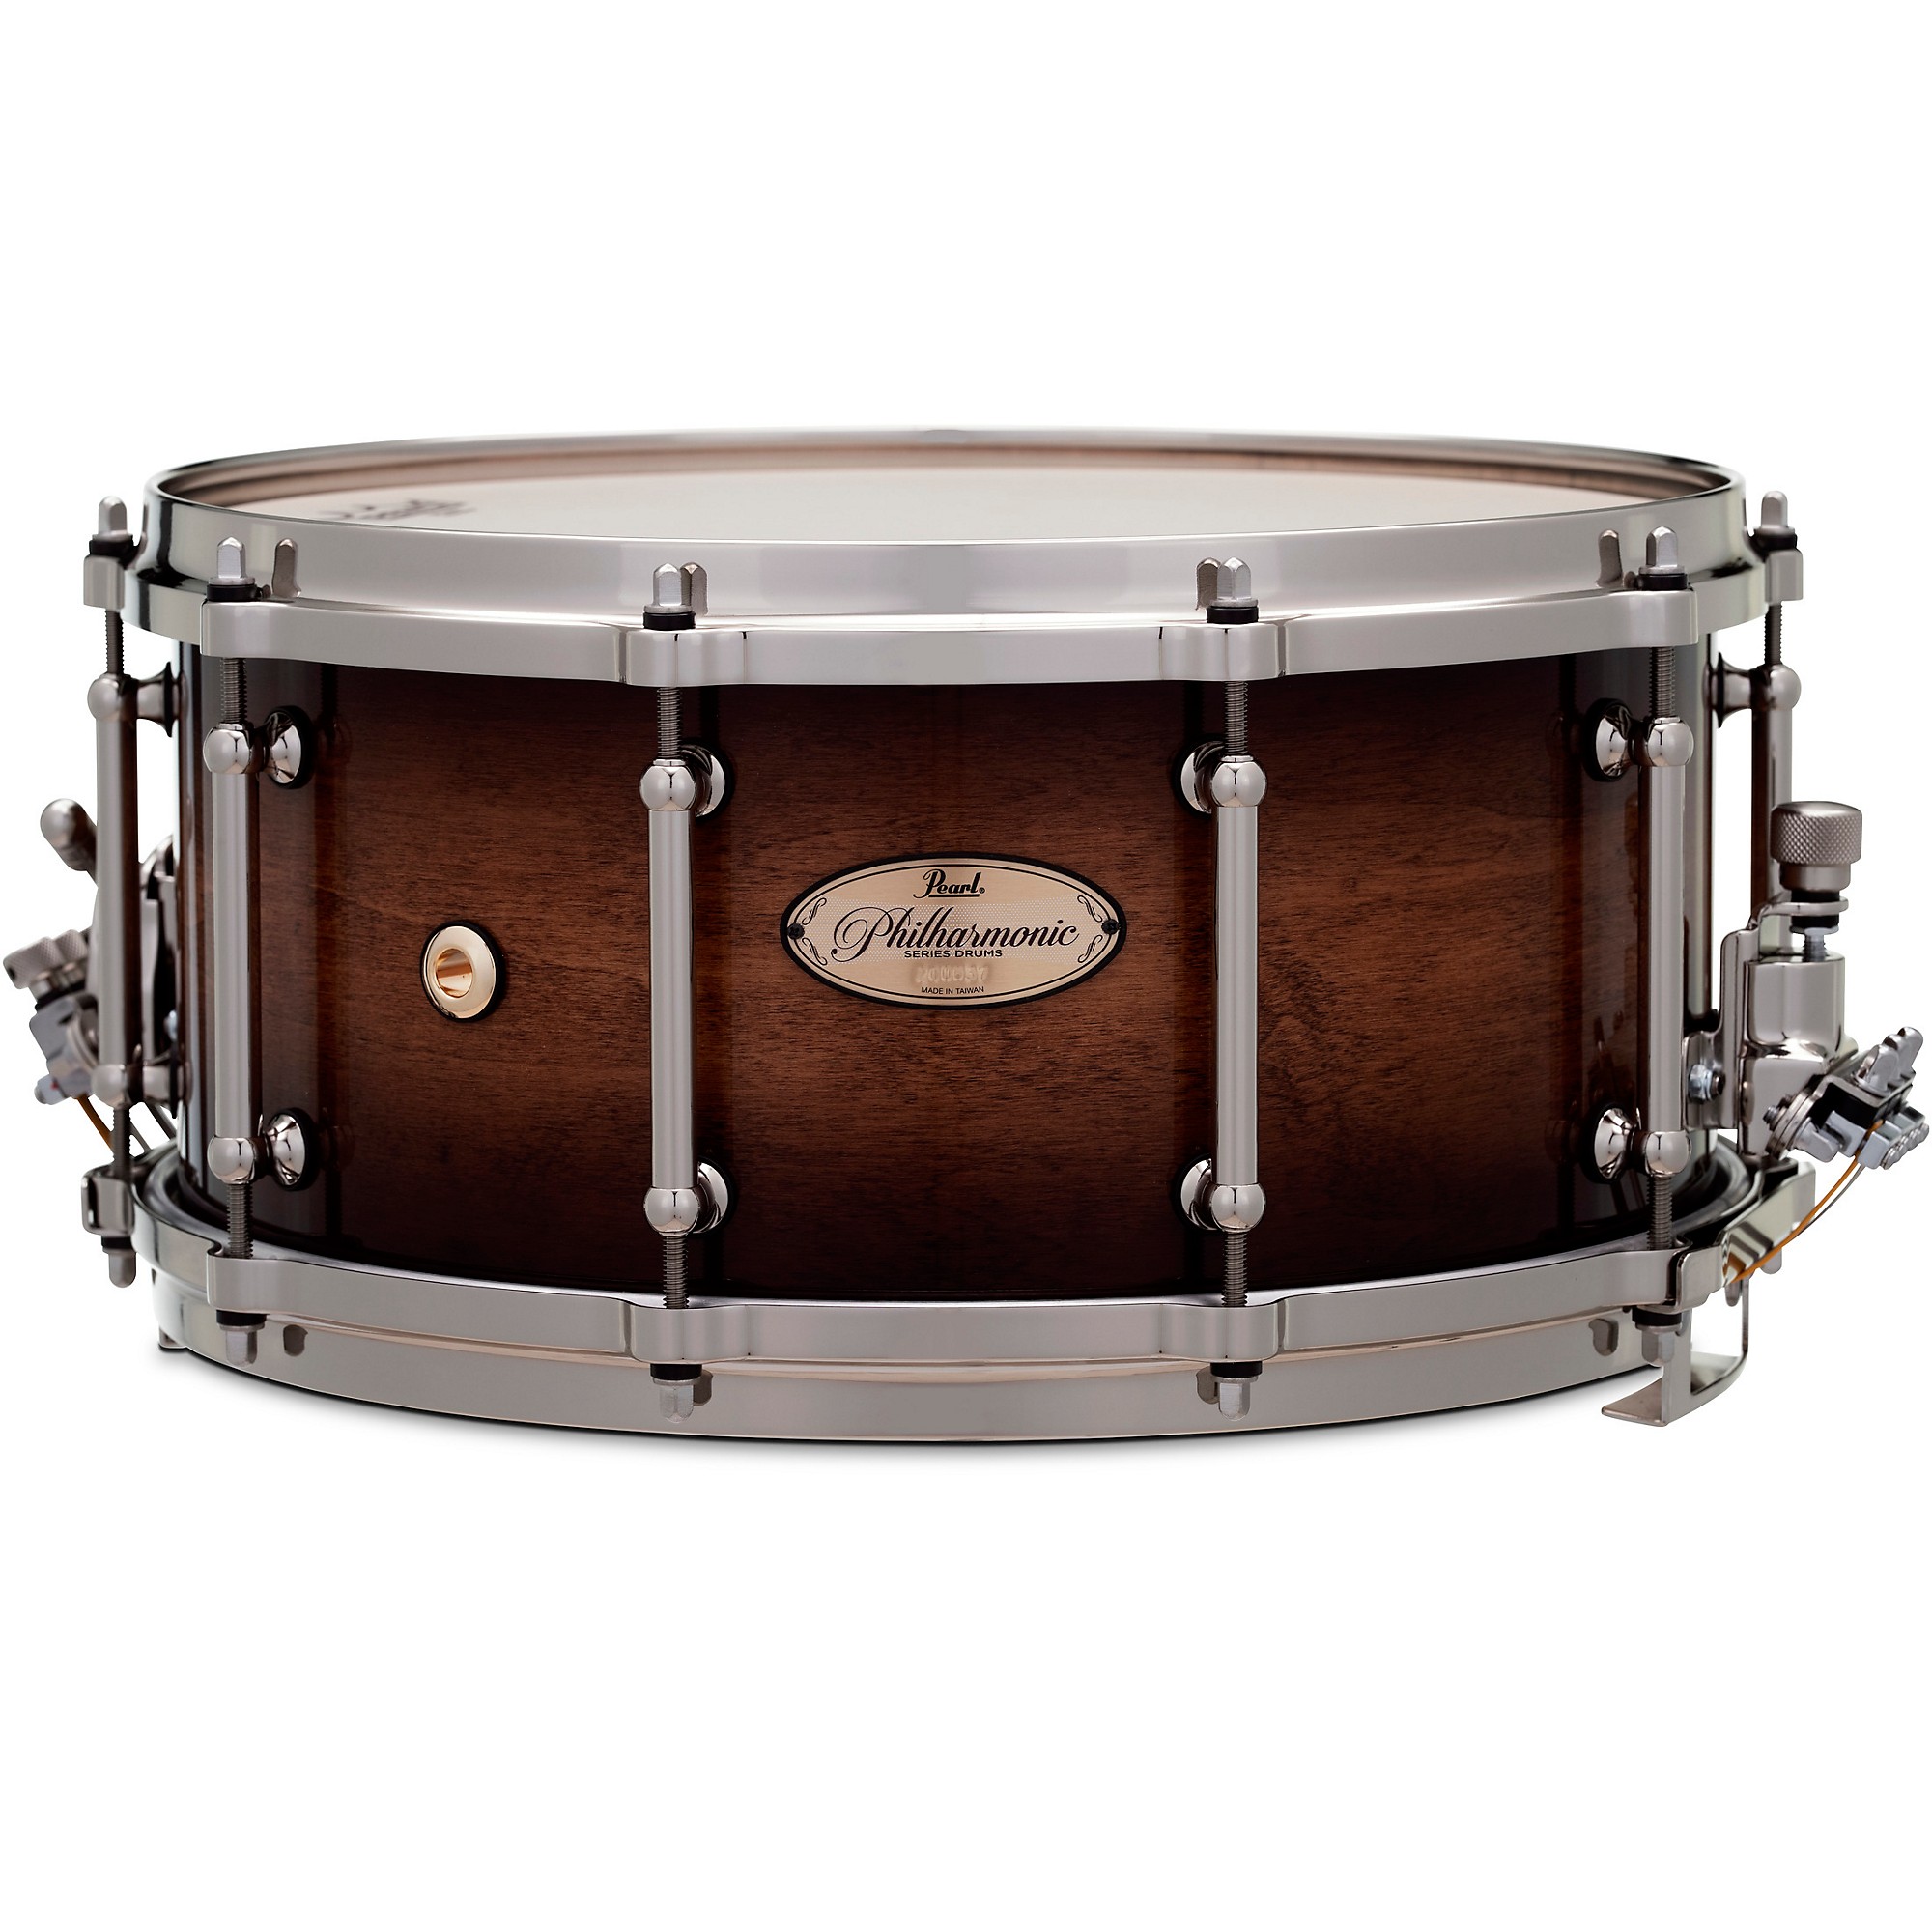 PHF1616 Pearl Philharmonic Maple Field Snare Drum For Sale - Some